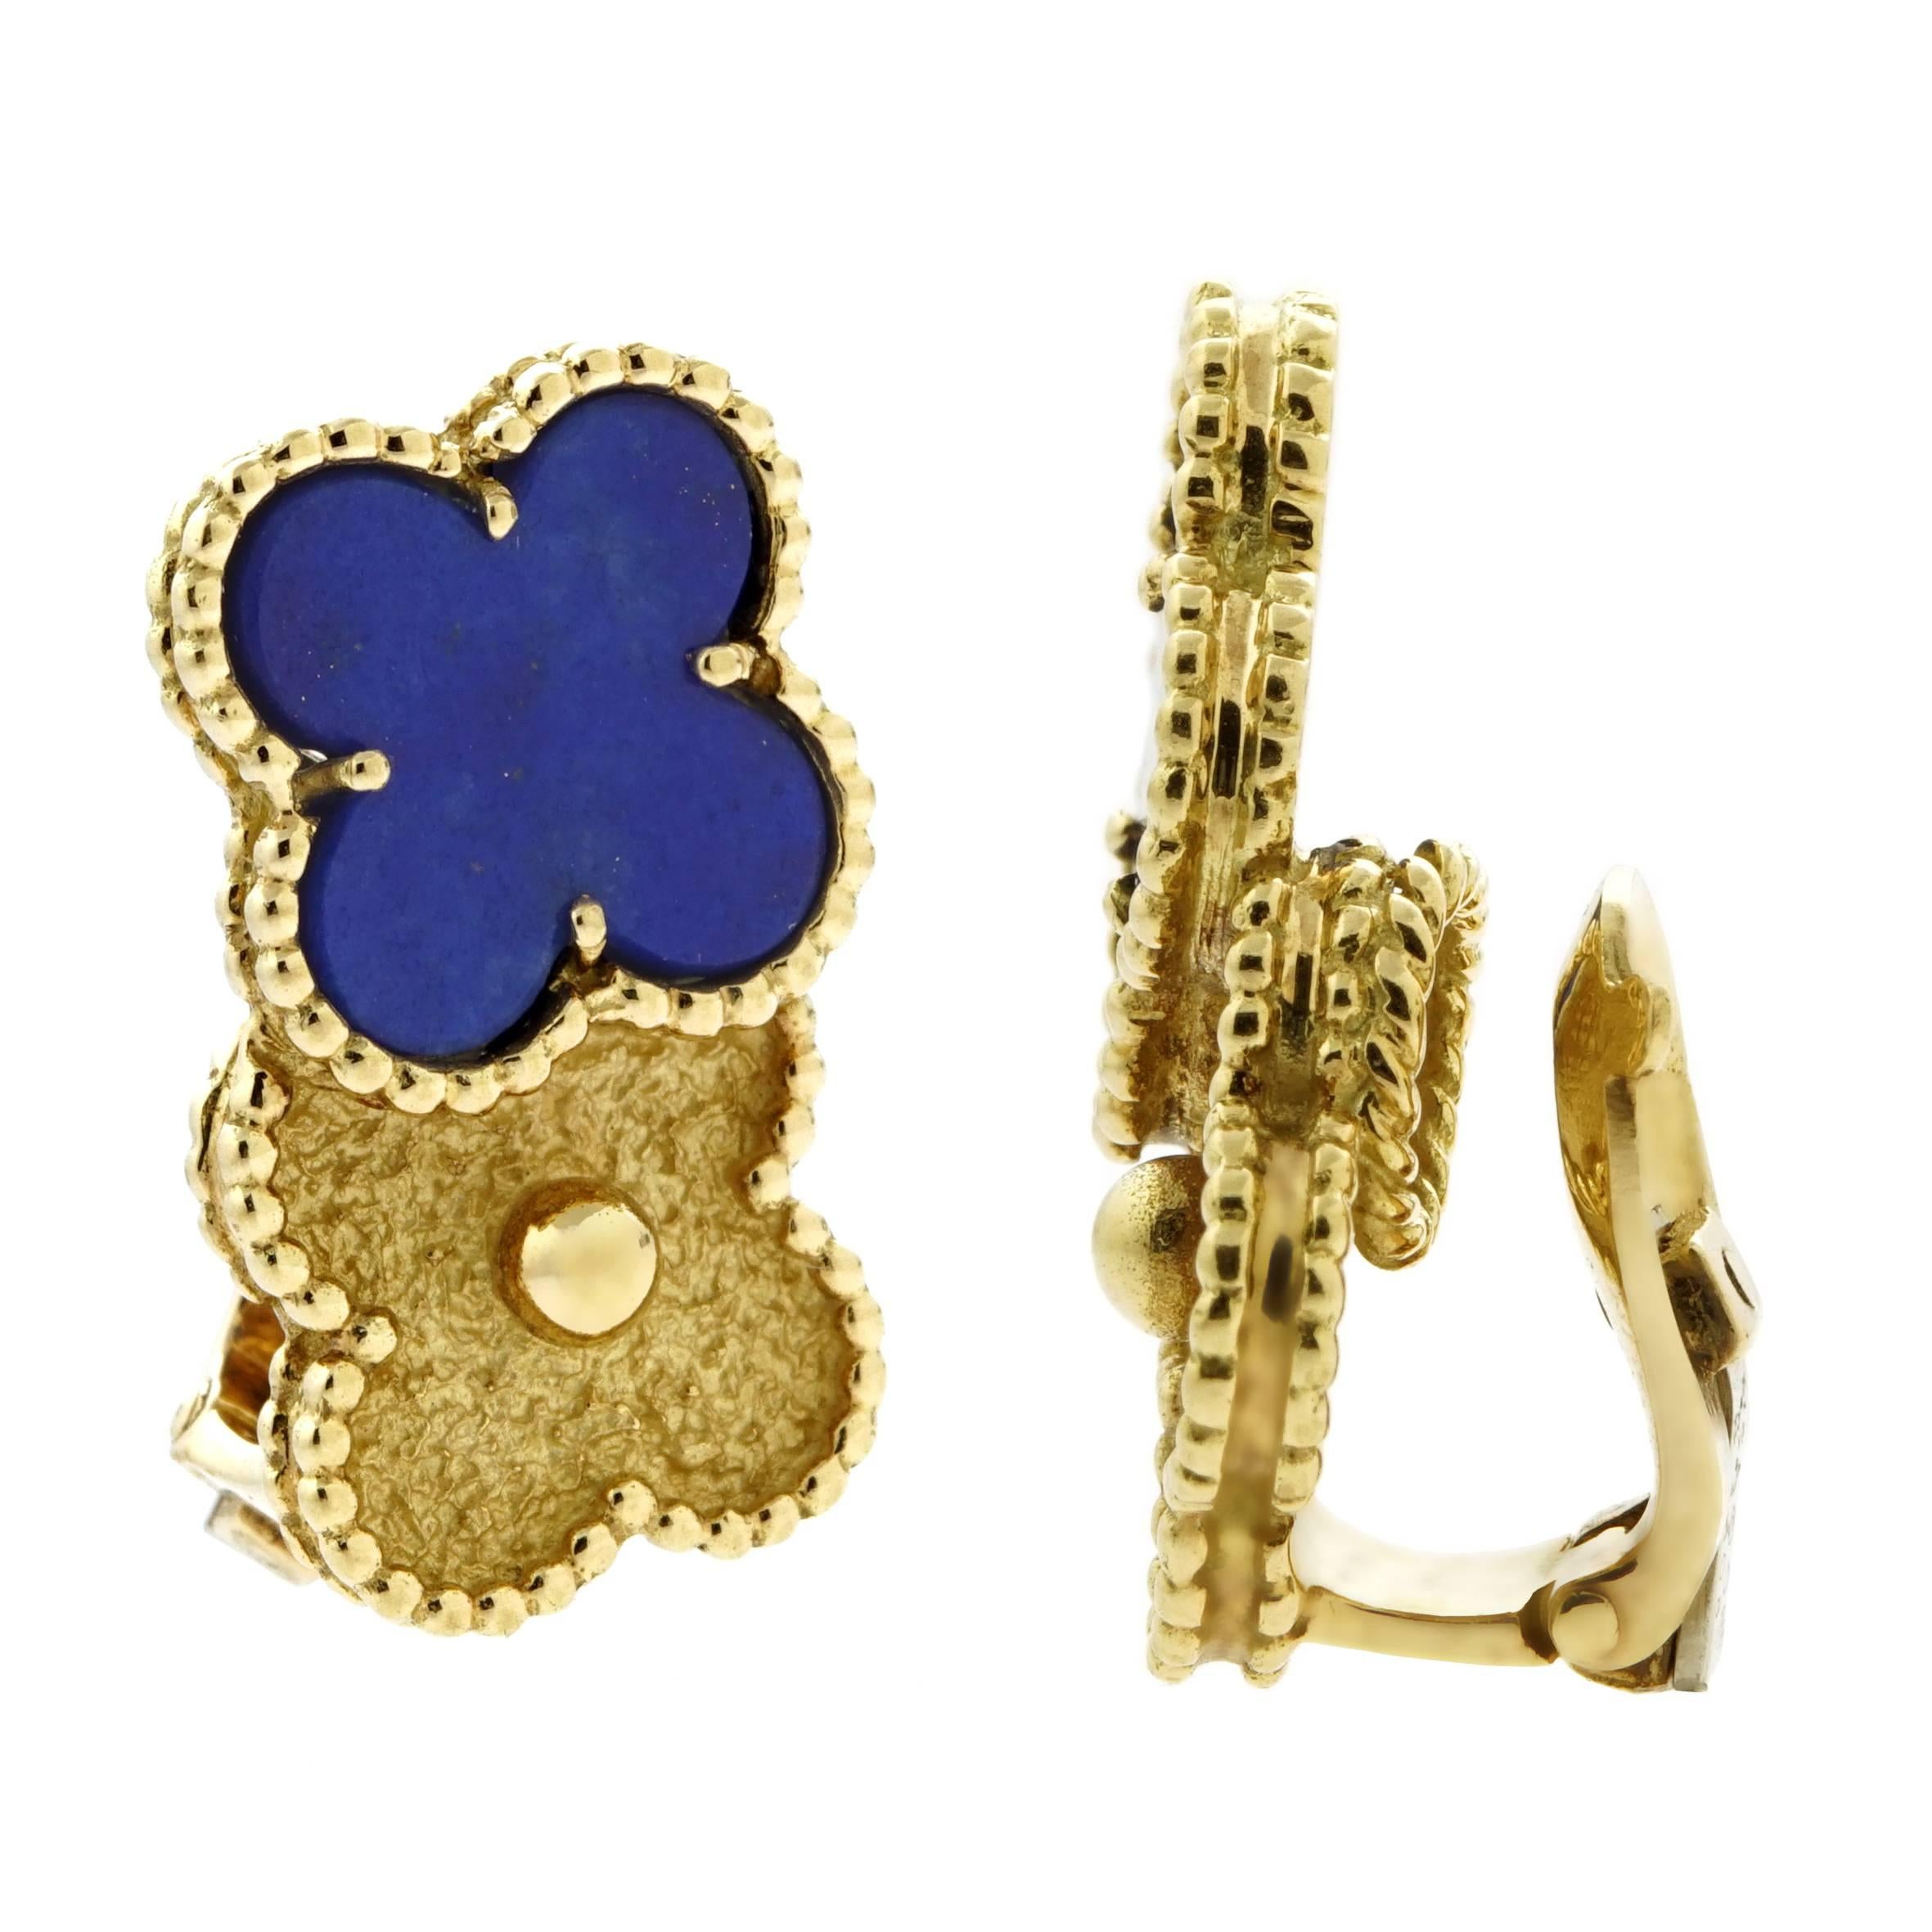 A magnificent pair of authentic Van Cleef & Arpels earrings featuring a double vintage Alhambra pattern adorned with a Lapis Luzuli stone set in shimmering 18k yellow gold, Earring Length: .90", Width: .82" 

This magnificent piece is